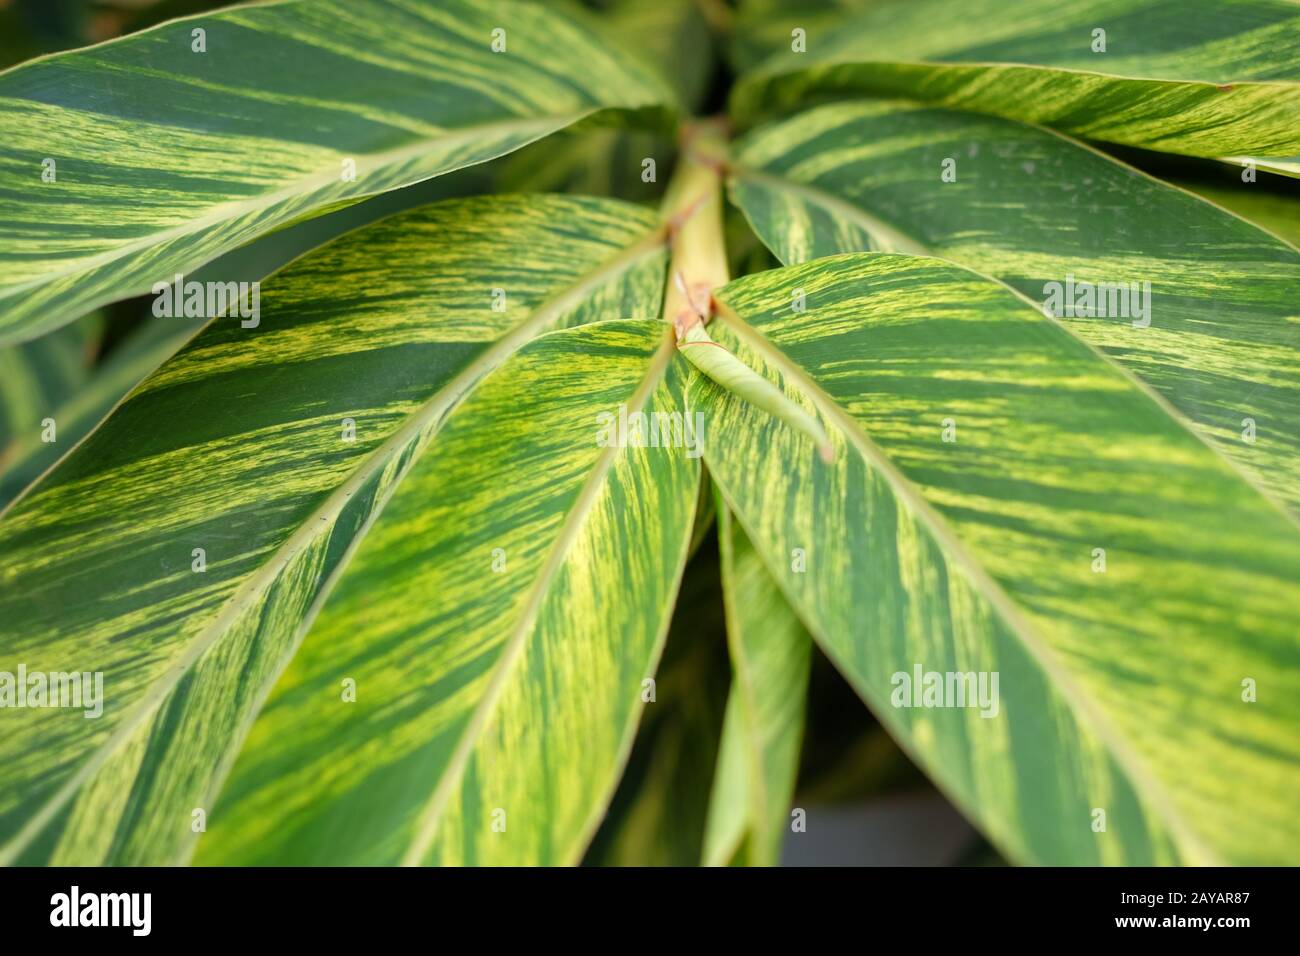 Graphic floral detail of green and yellow leaves of ginger lily (Hedychium gardnerianum). Stock Photo